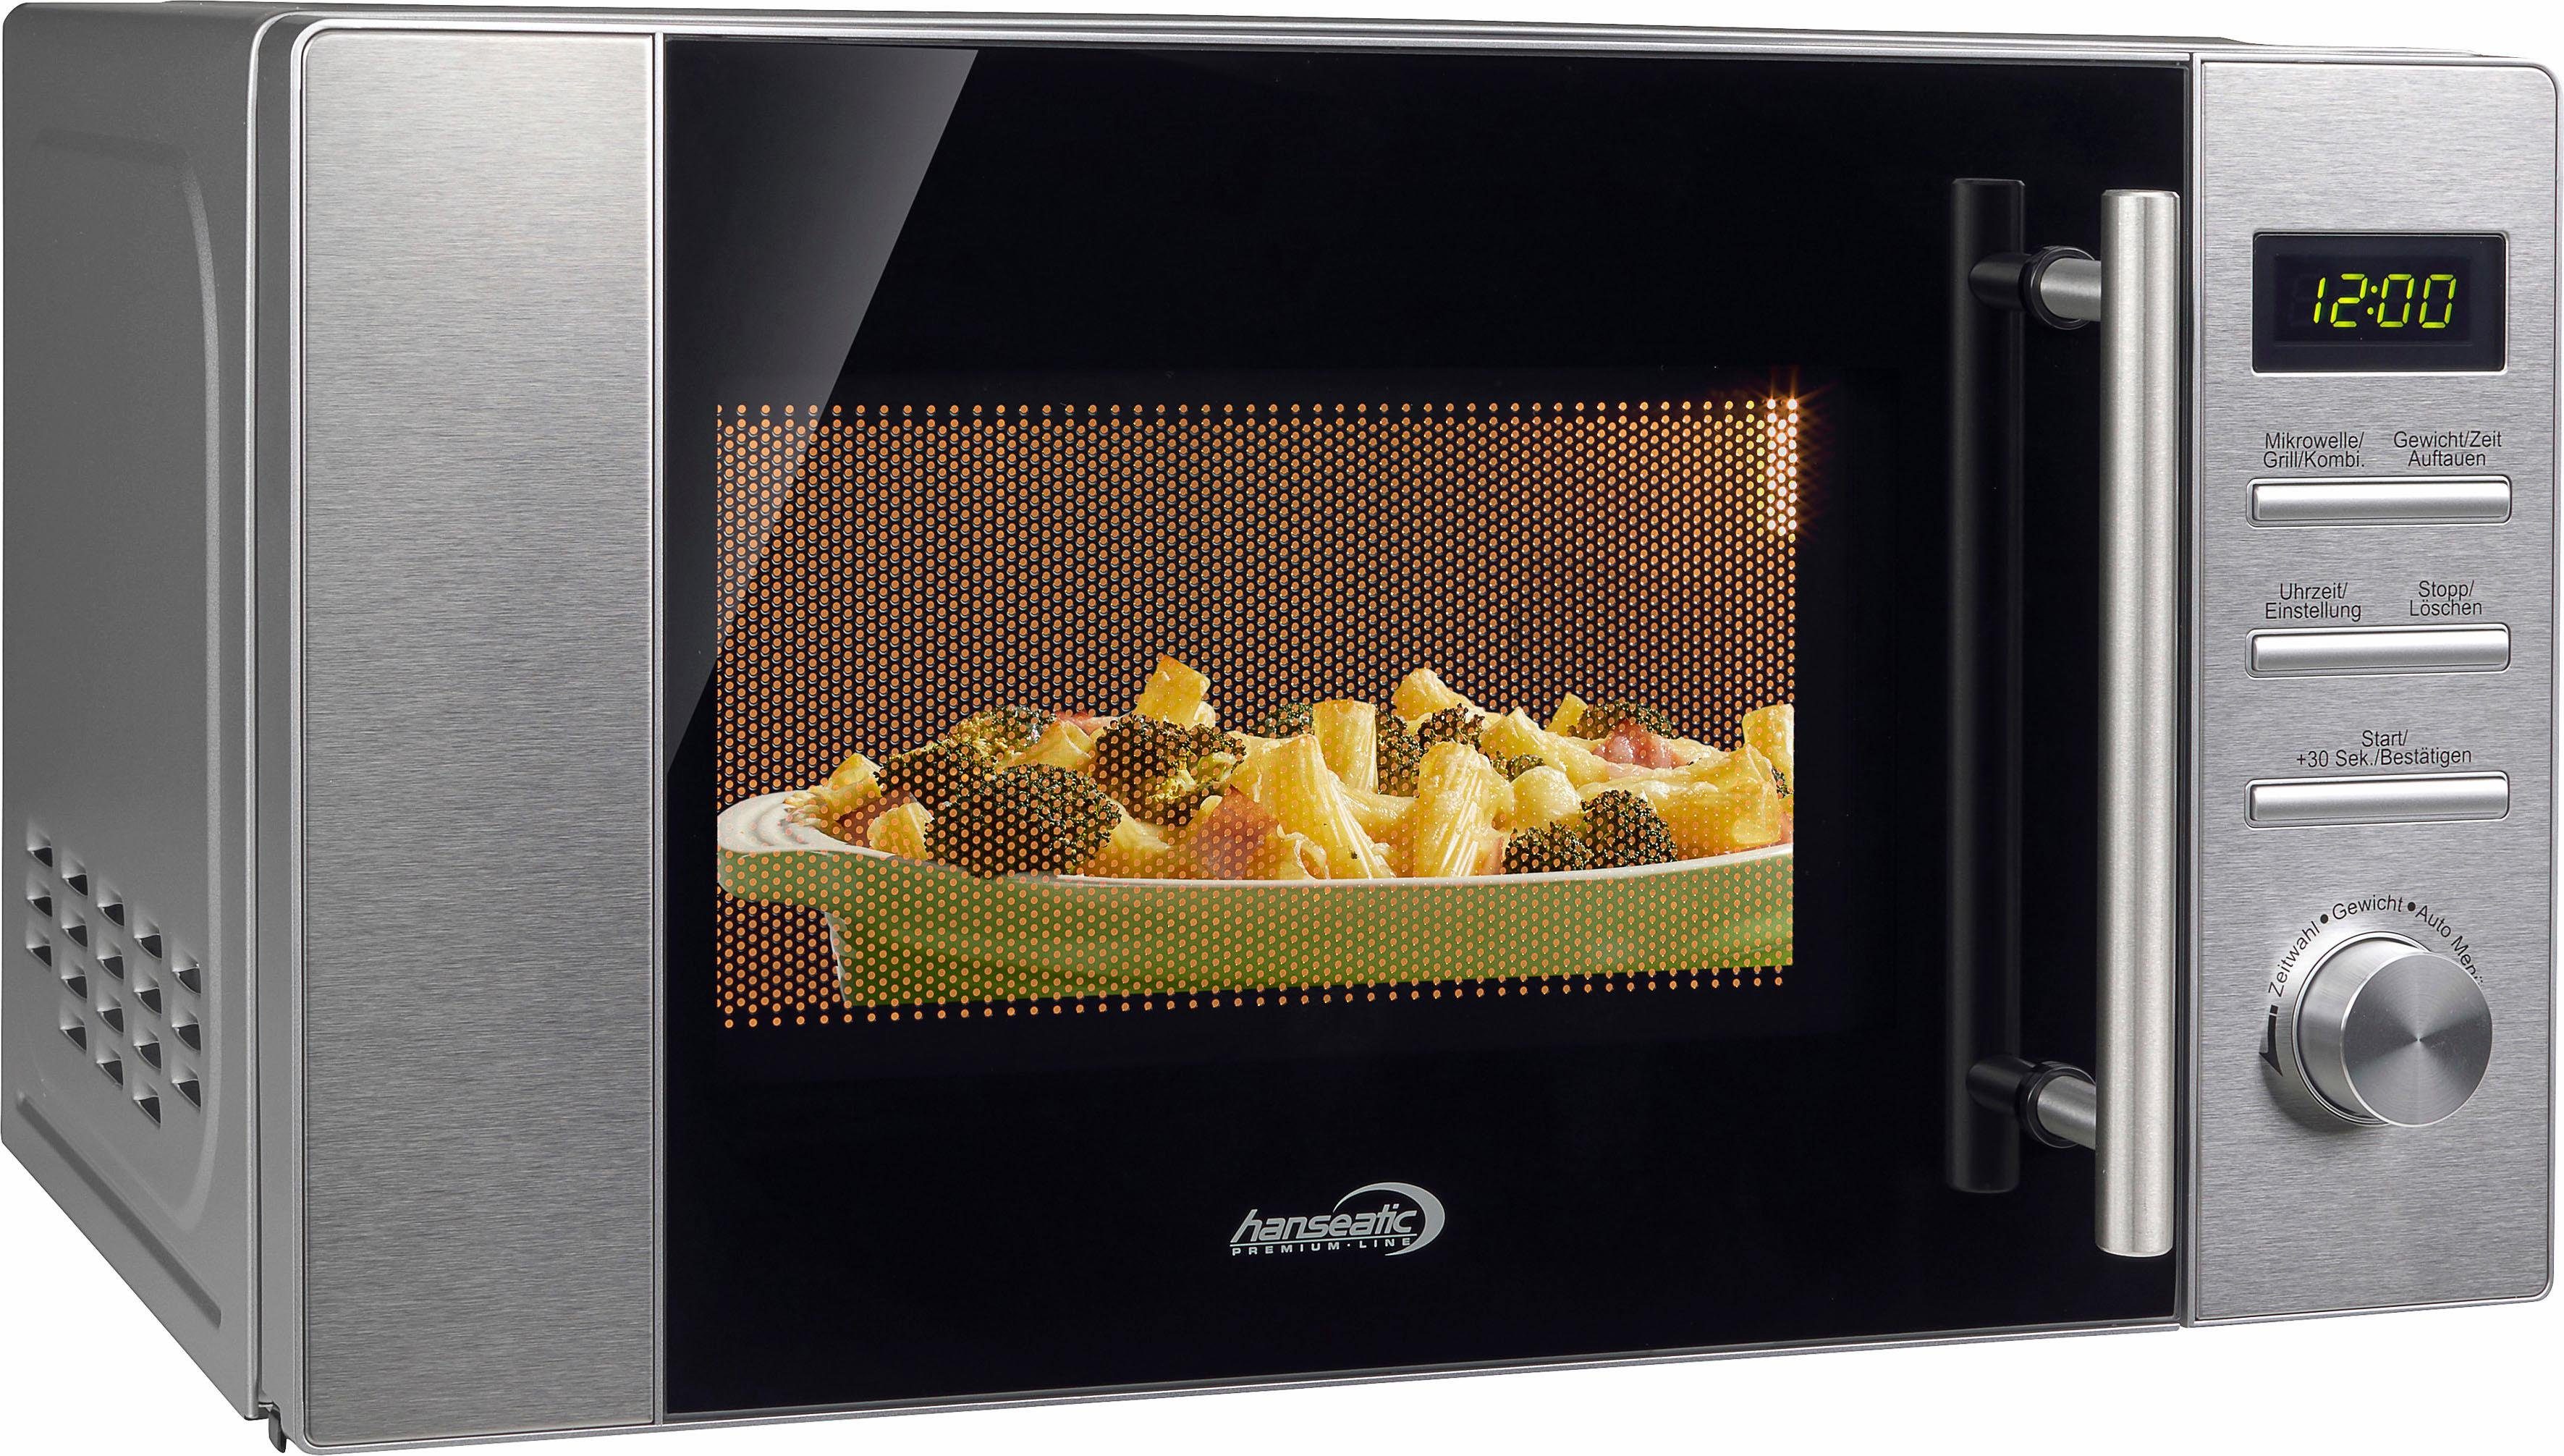 l Mikrowelle Hanseatic Grill, 656920, 20